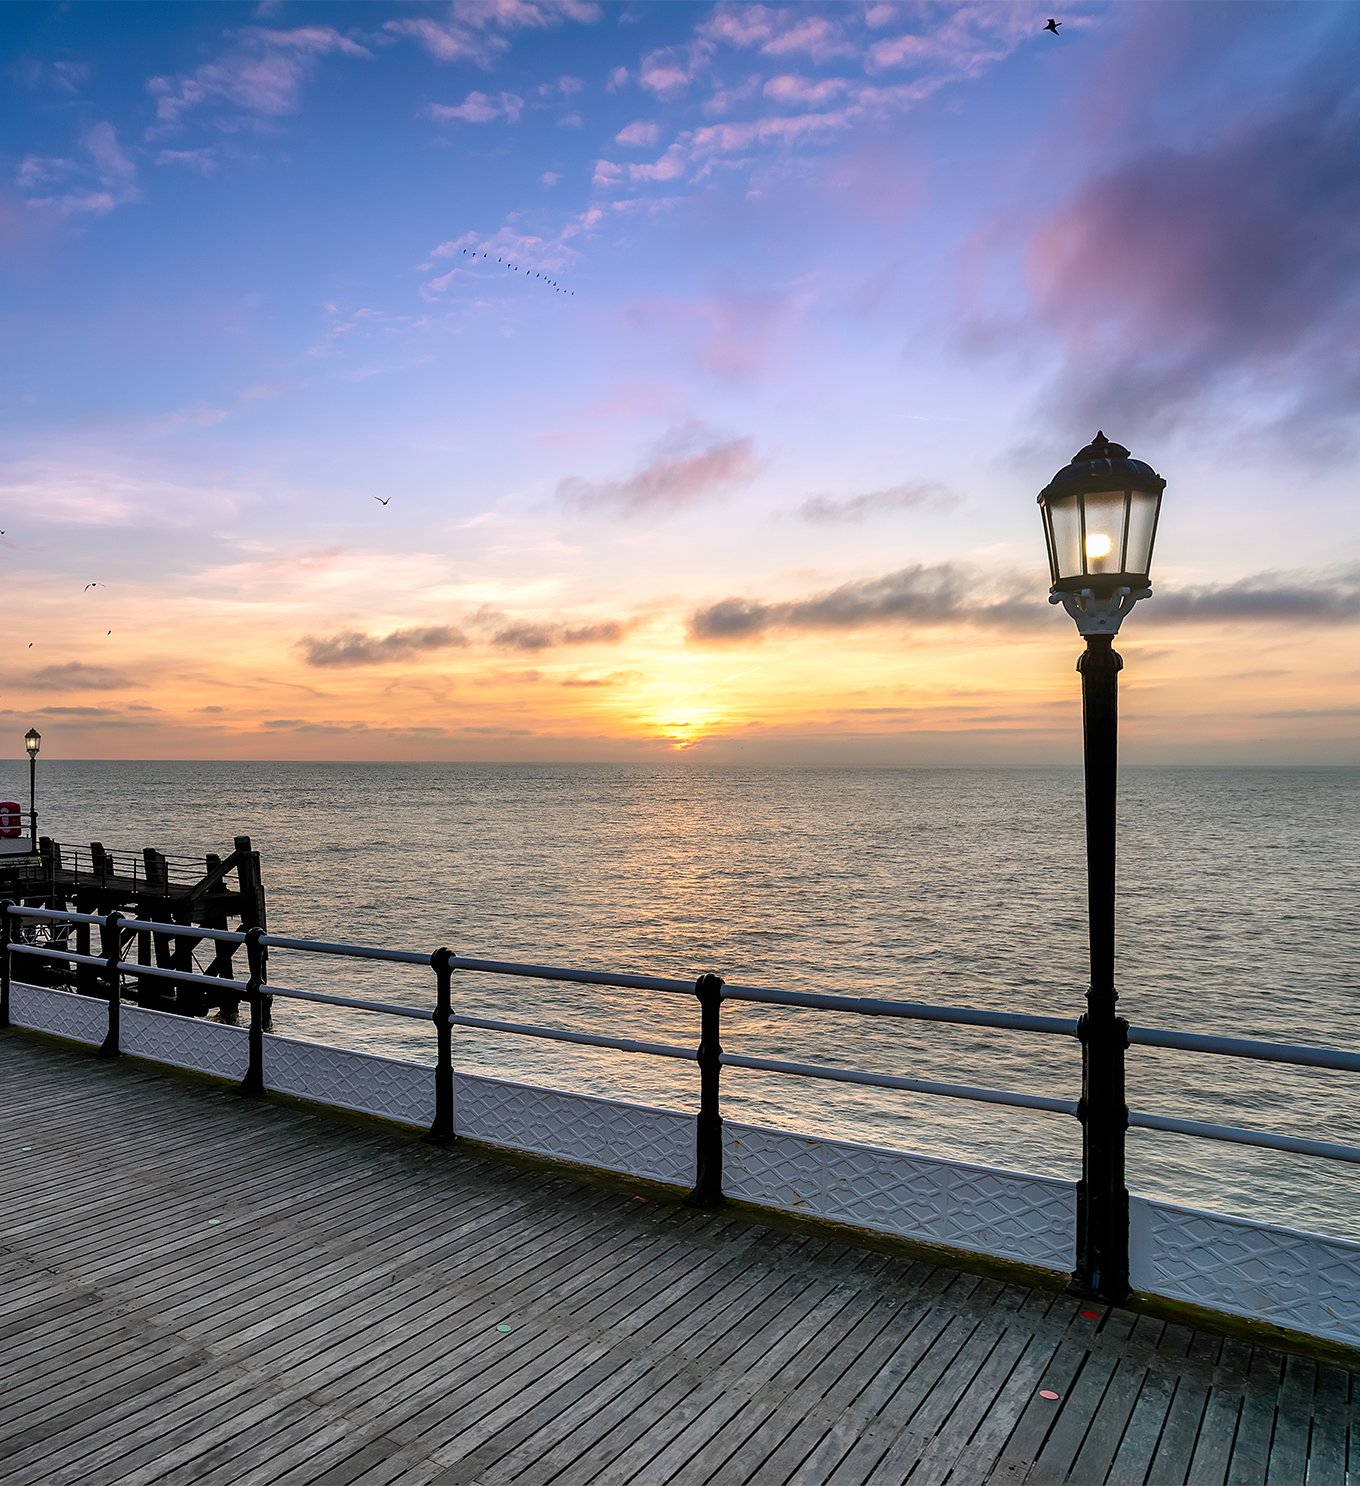 Sunset at Worthing Pier in West Sussex